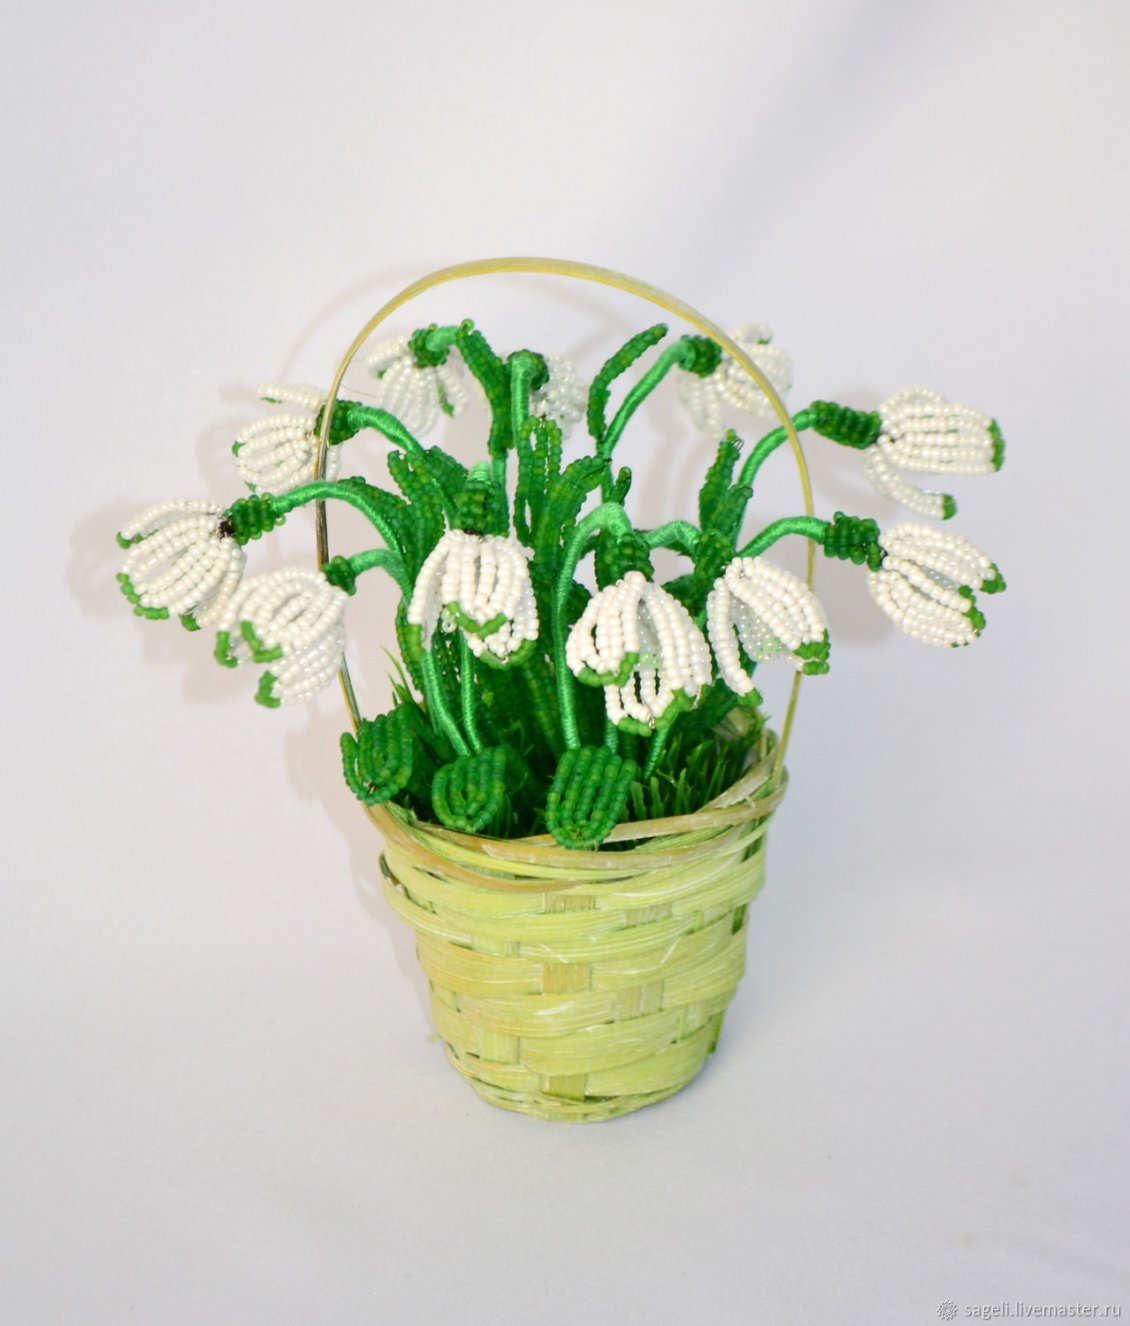 Download Wallpaper Abstract snowdrops flower in a basket - Spring gift